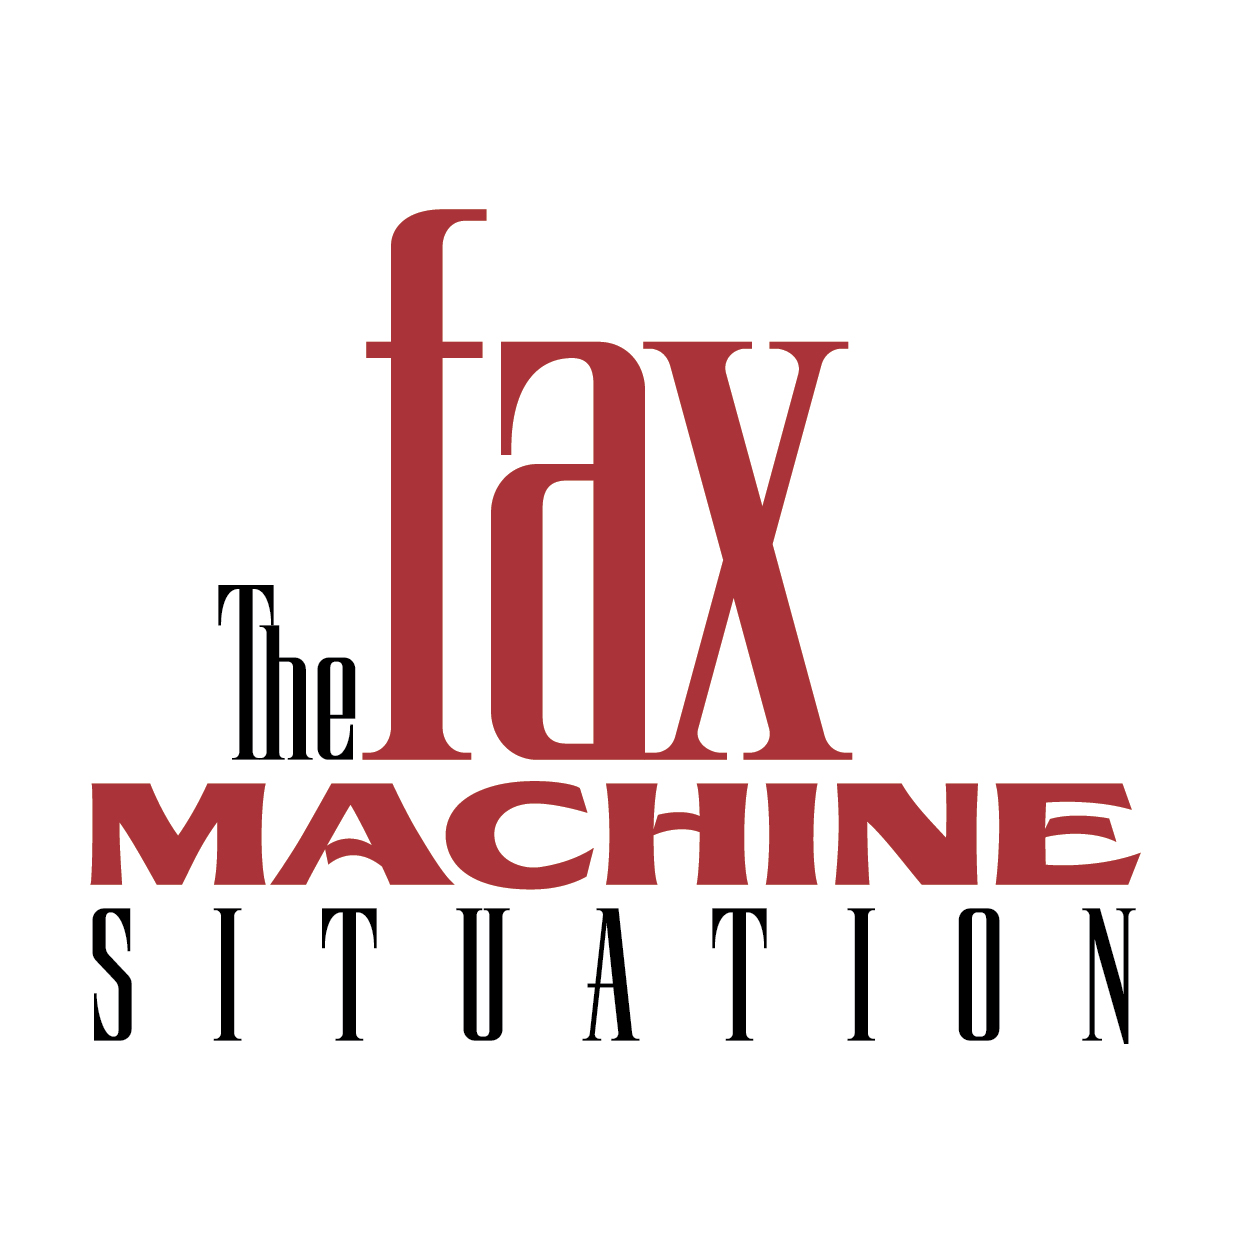 The Fax Machine Situation